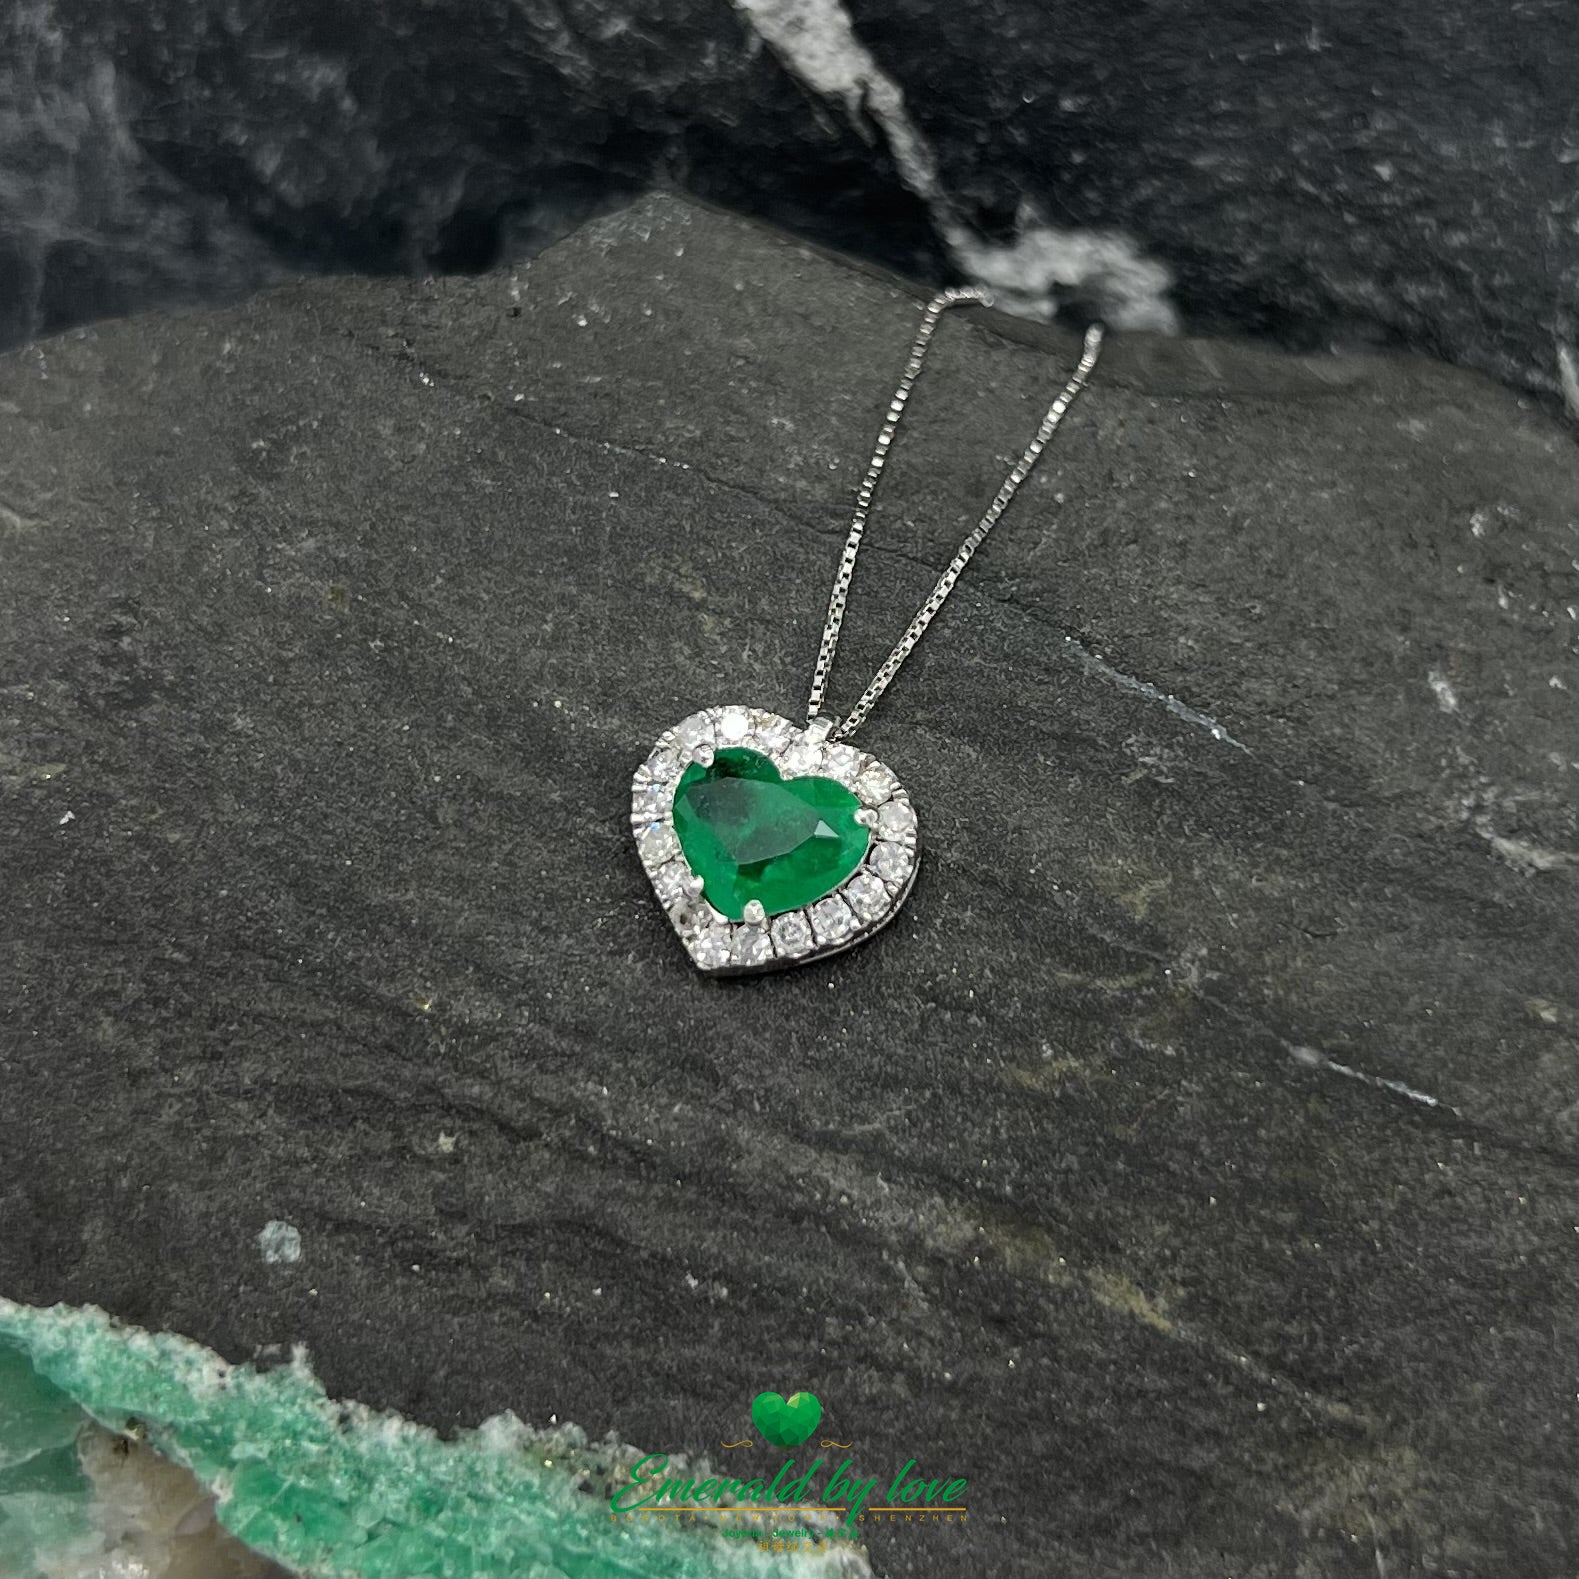 Heart-Shaped Emerald Pendant in 18K White Gold with Diamonds